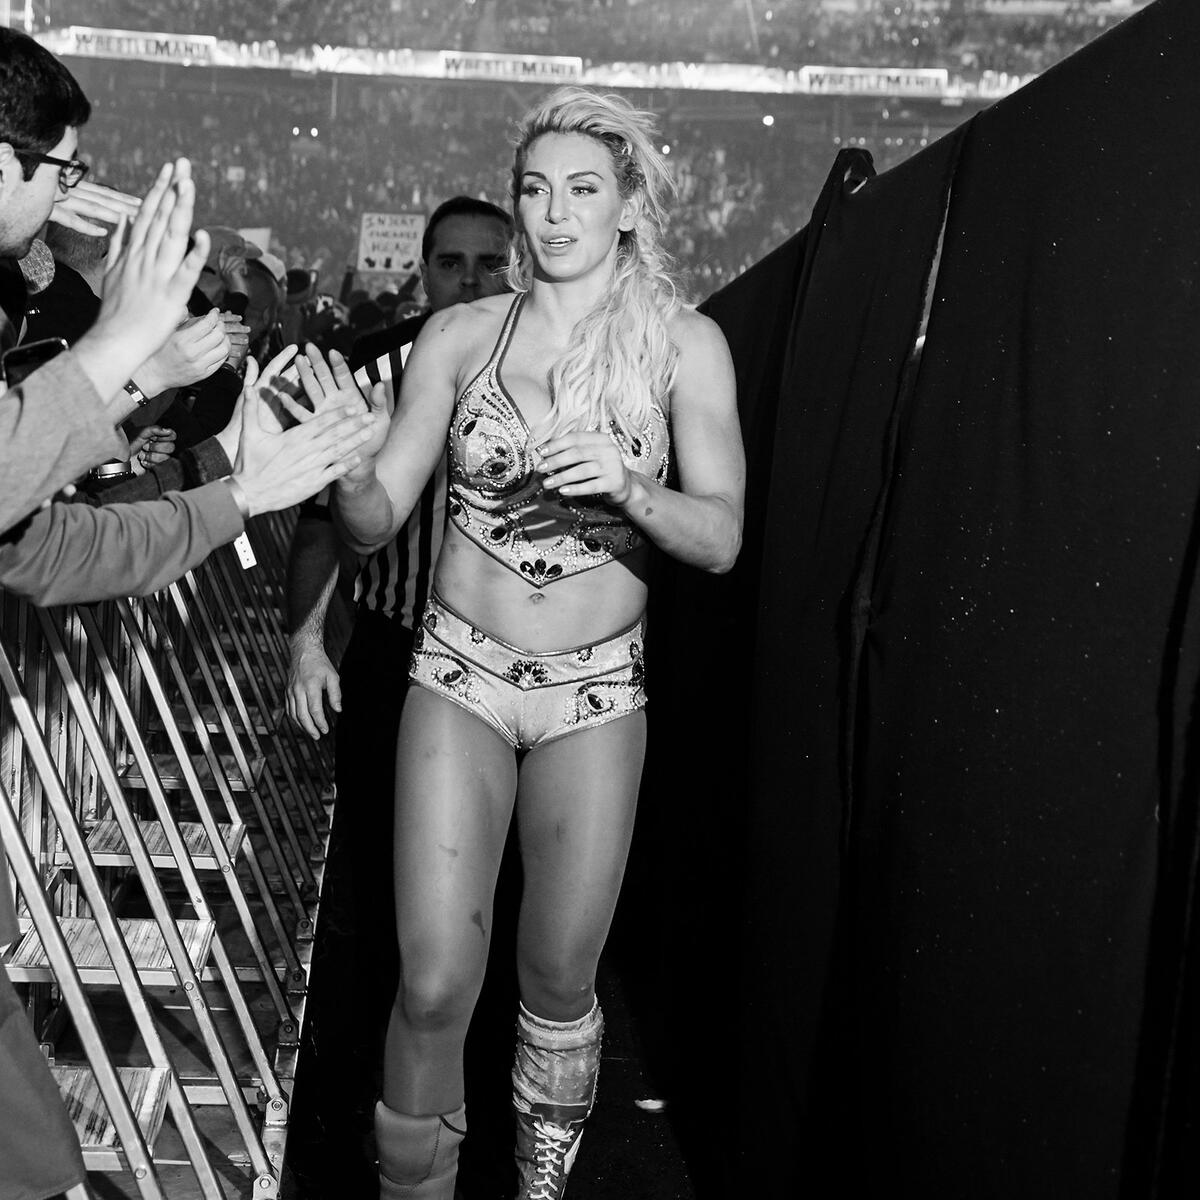 Behind The Scenes At Wrestlemania Photos Wwe